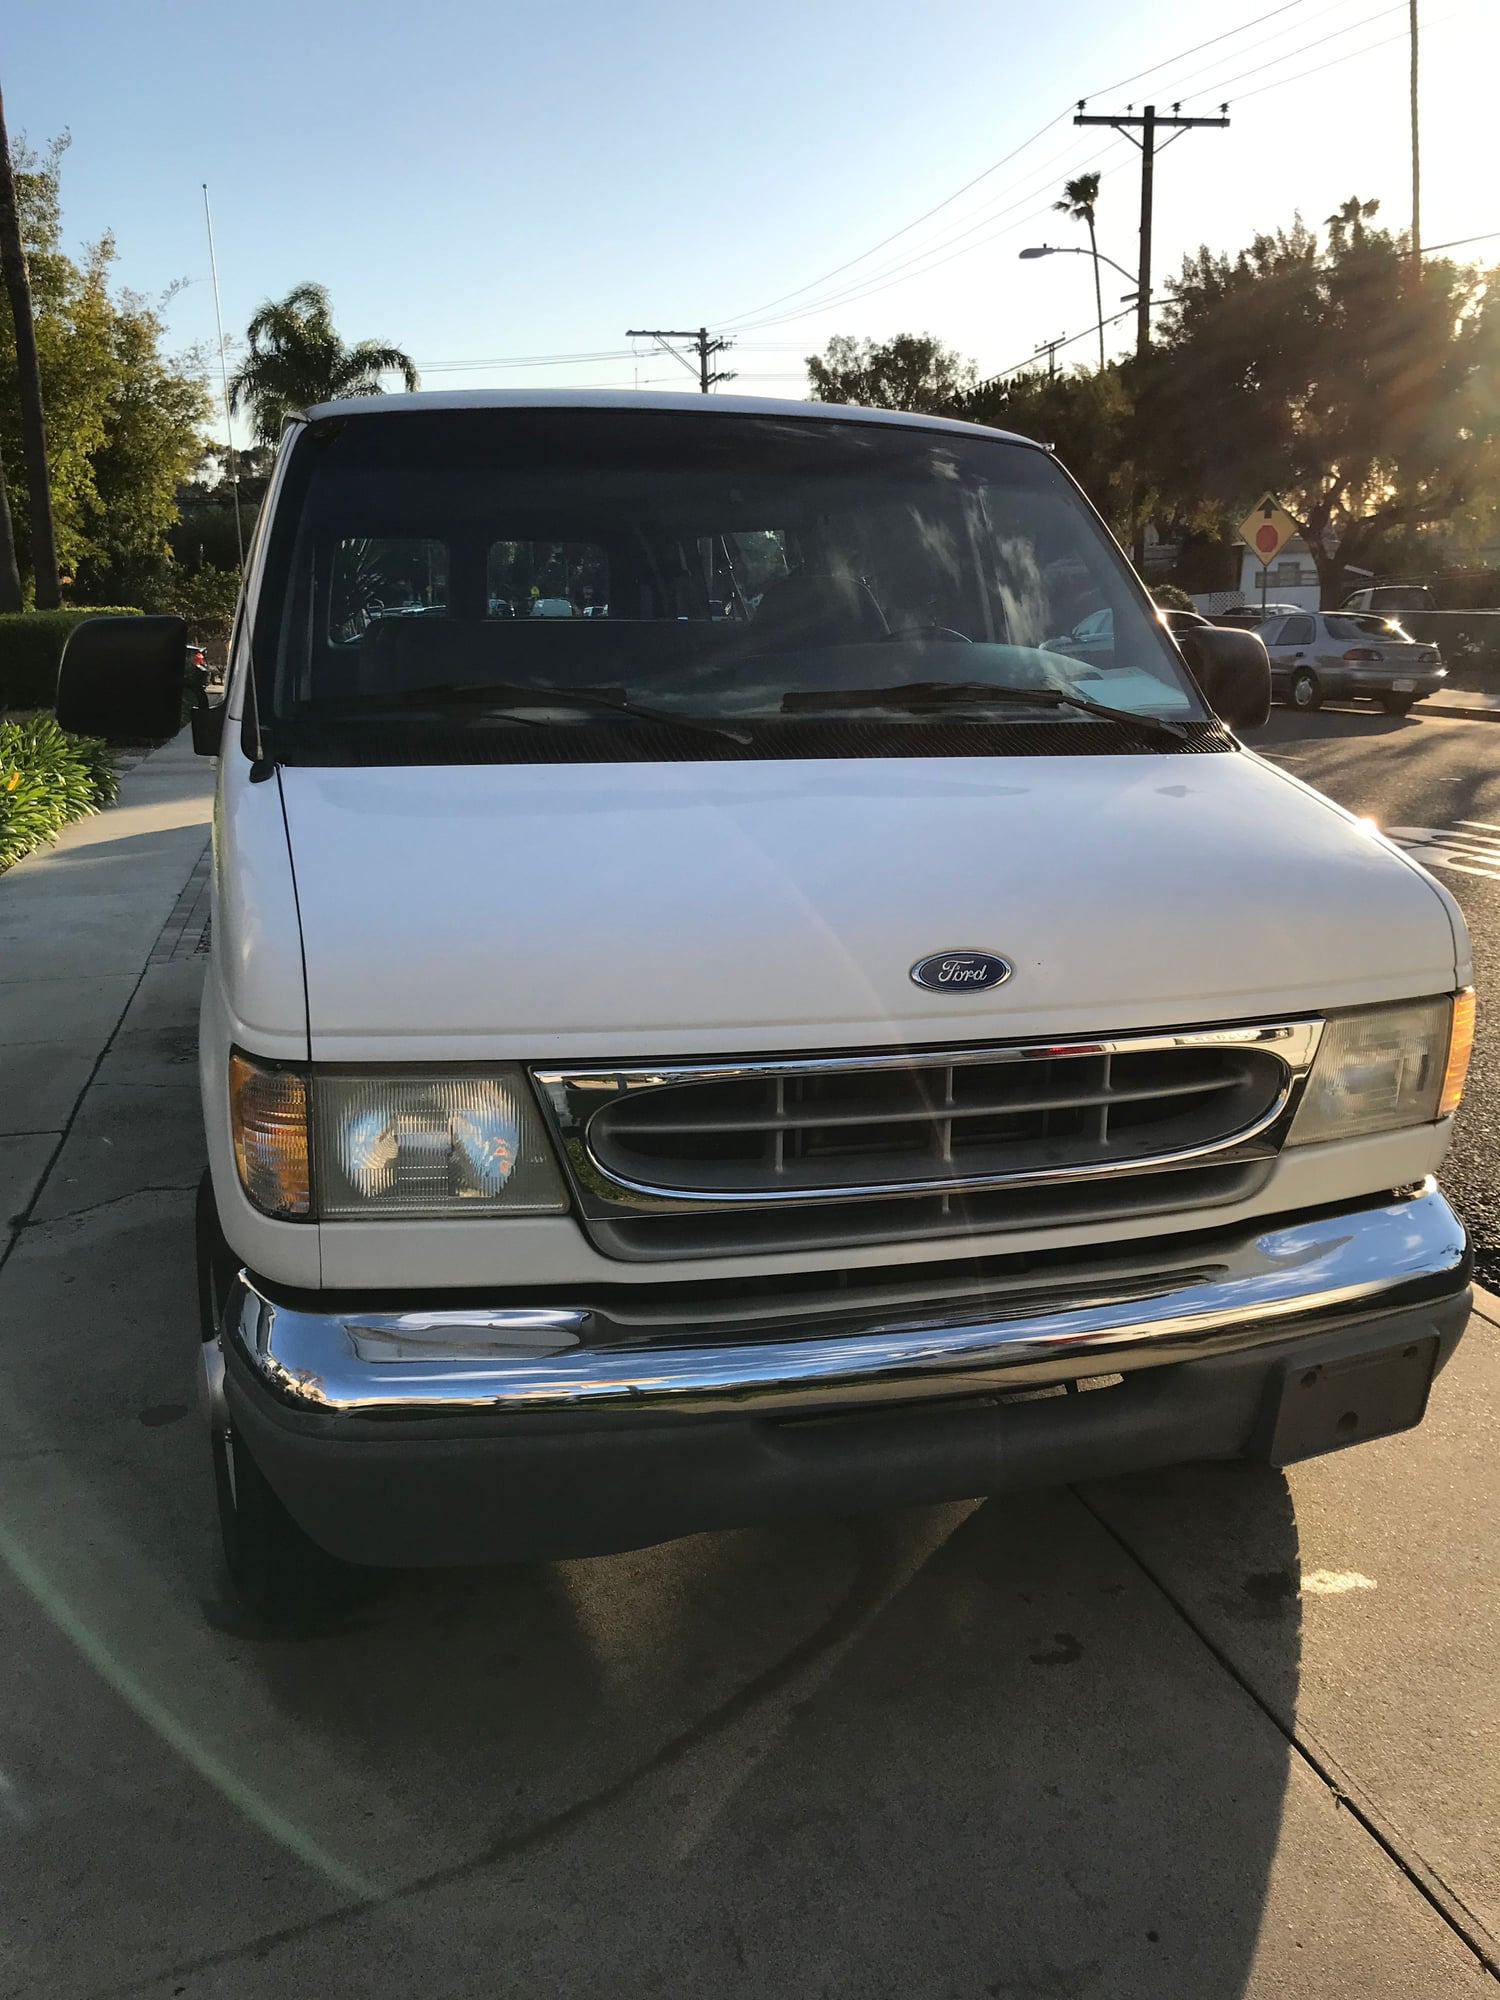 E 350 Club Wagon Xlt Factory Cng 1997 Ford Truck Enthusiasts Forums